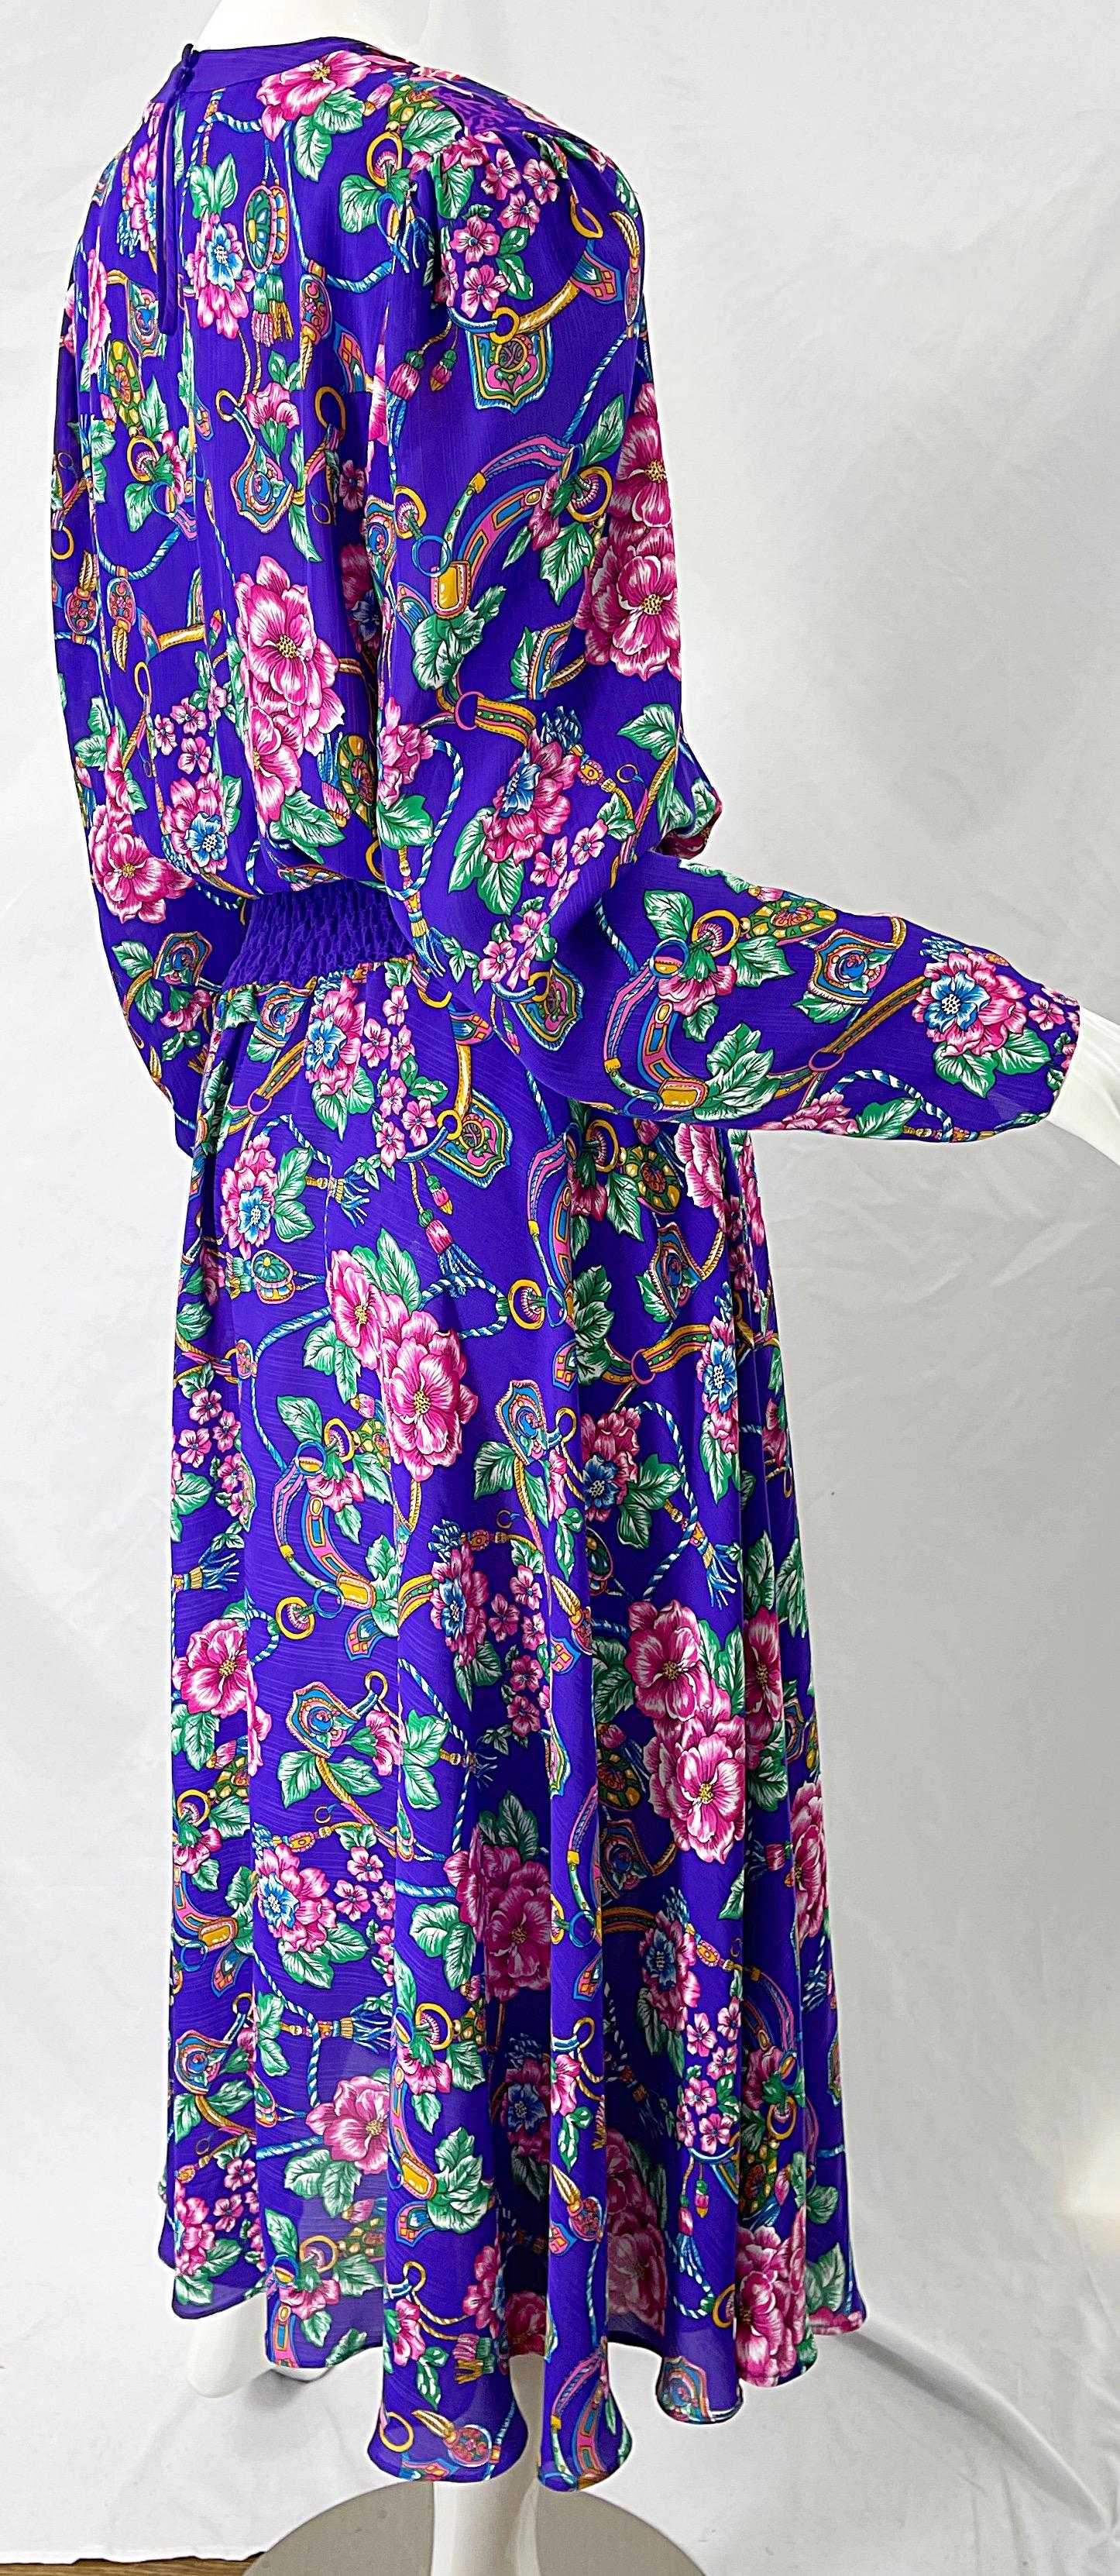 1980s Diane Freis Purple Regal Flowers and Jewels Printed Long Sleeve 80s Dress For Sale 4